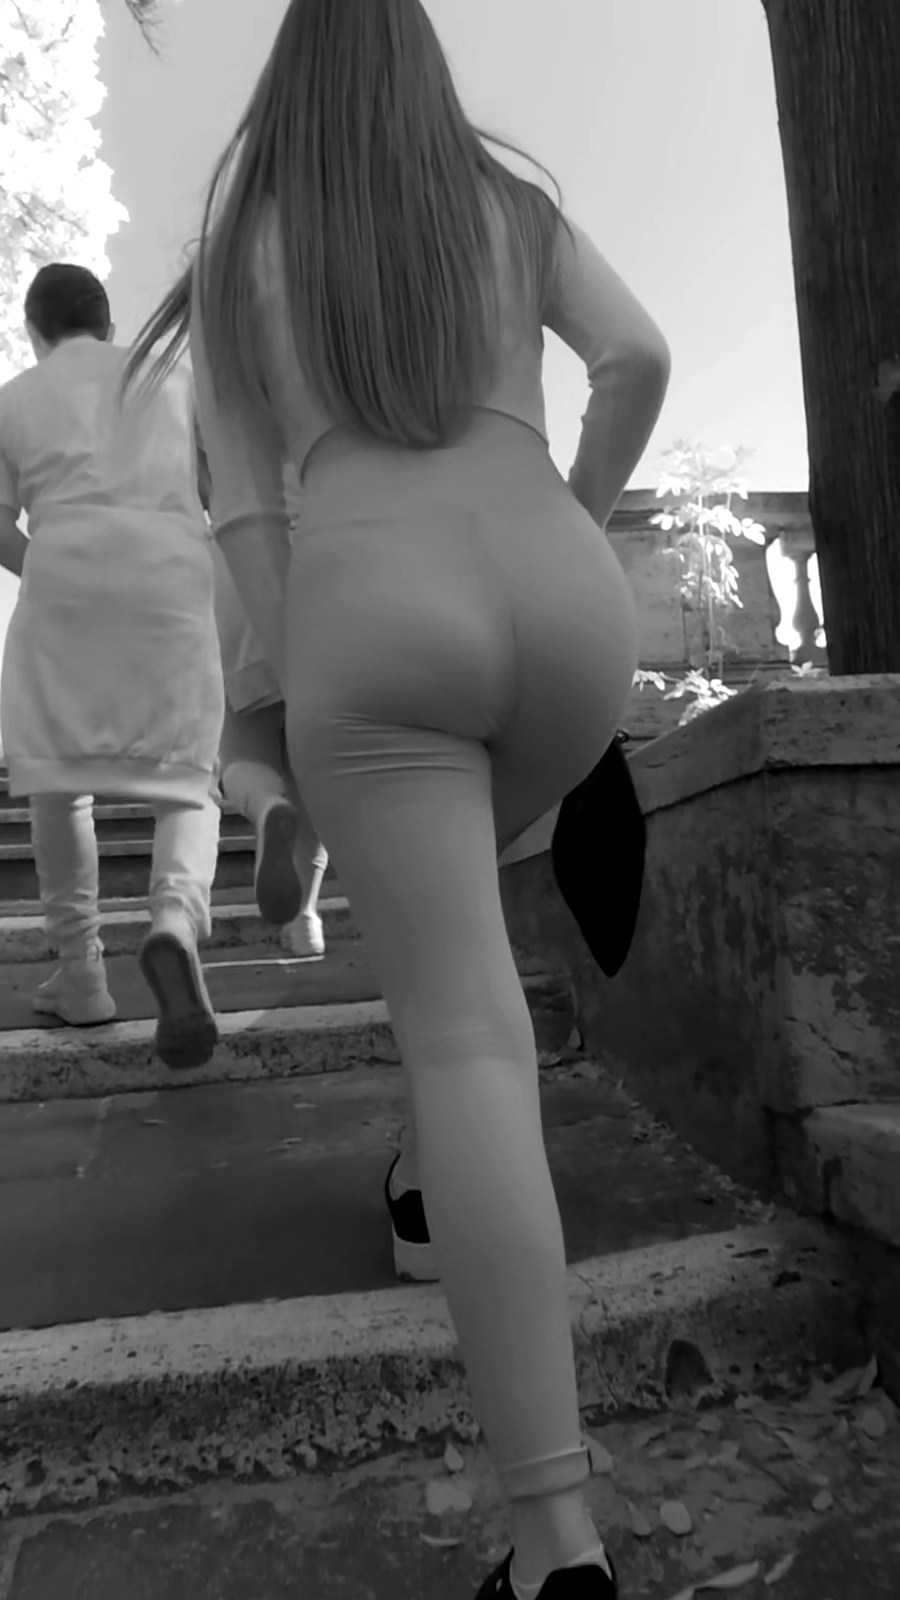 Cute Slim TEEN With BIG ASS In White Spandex With Visible Panty Lines - Candid Teens - Creepshots - Candid Voyeur Girls - Candid Ass Girls